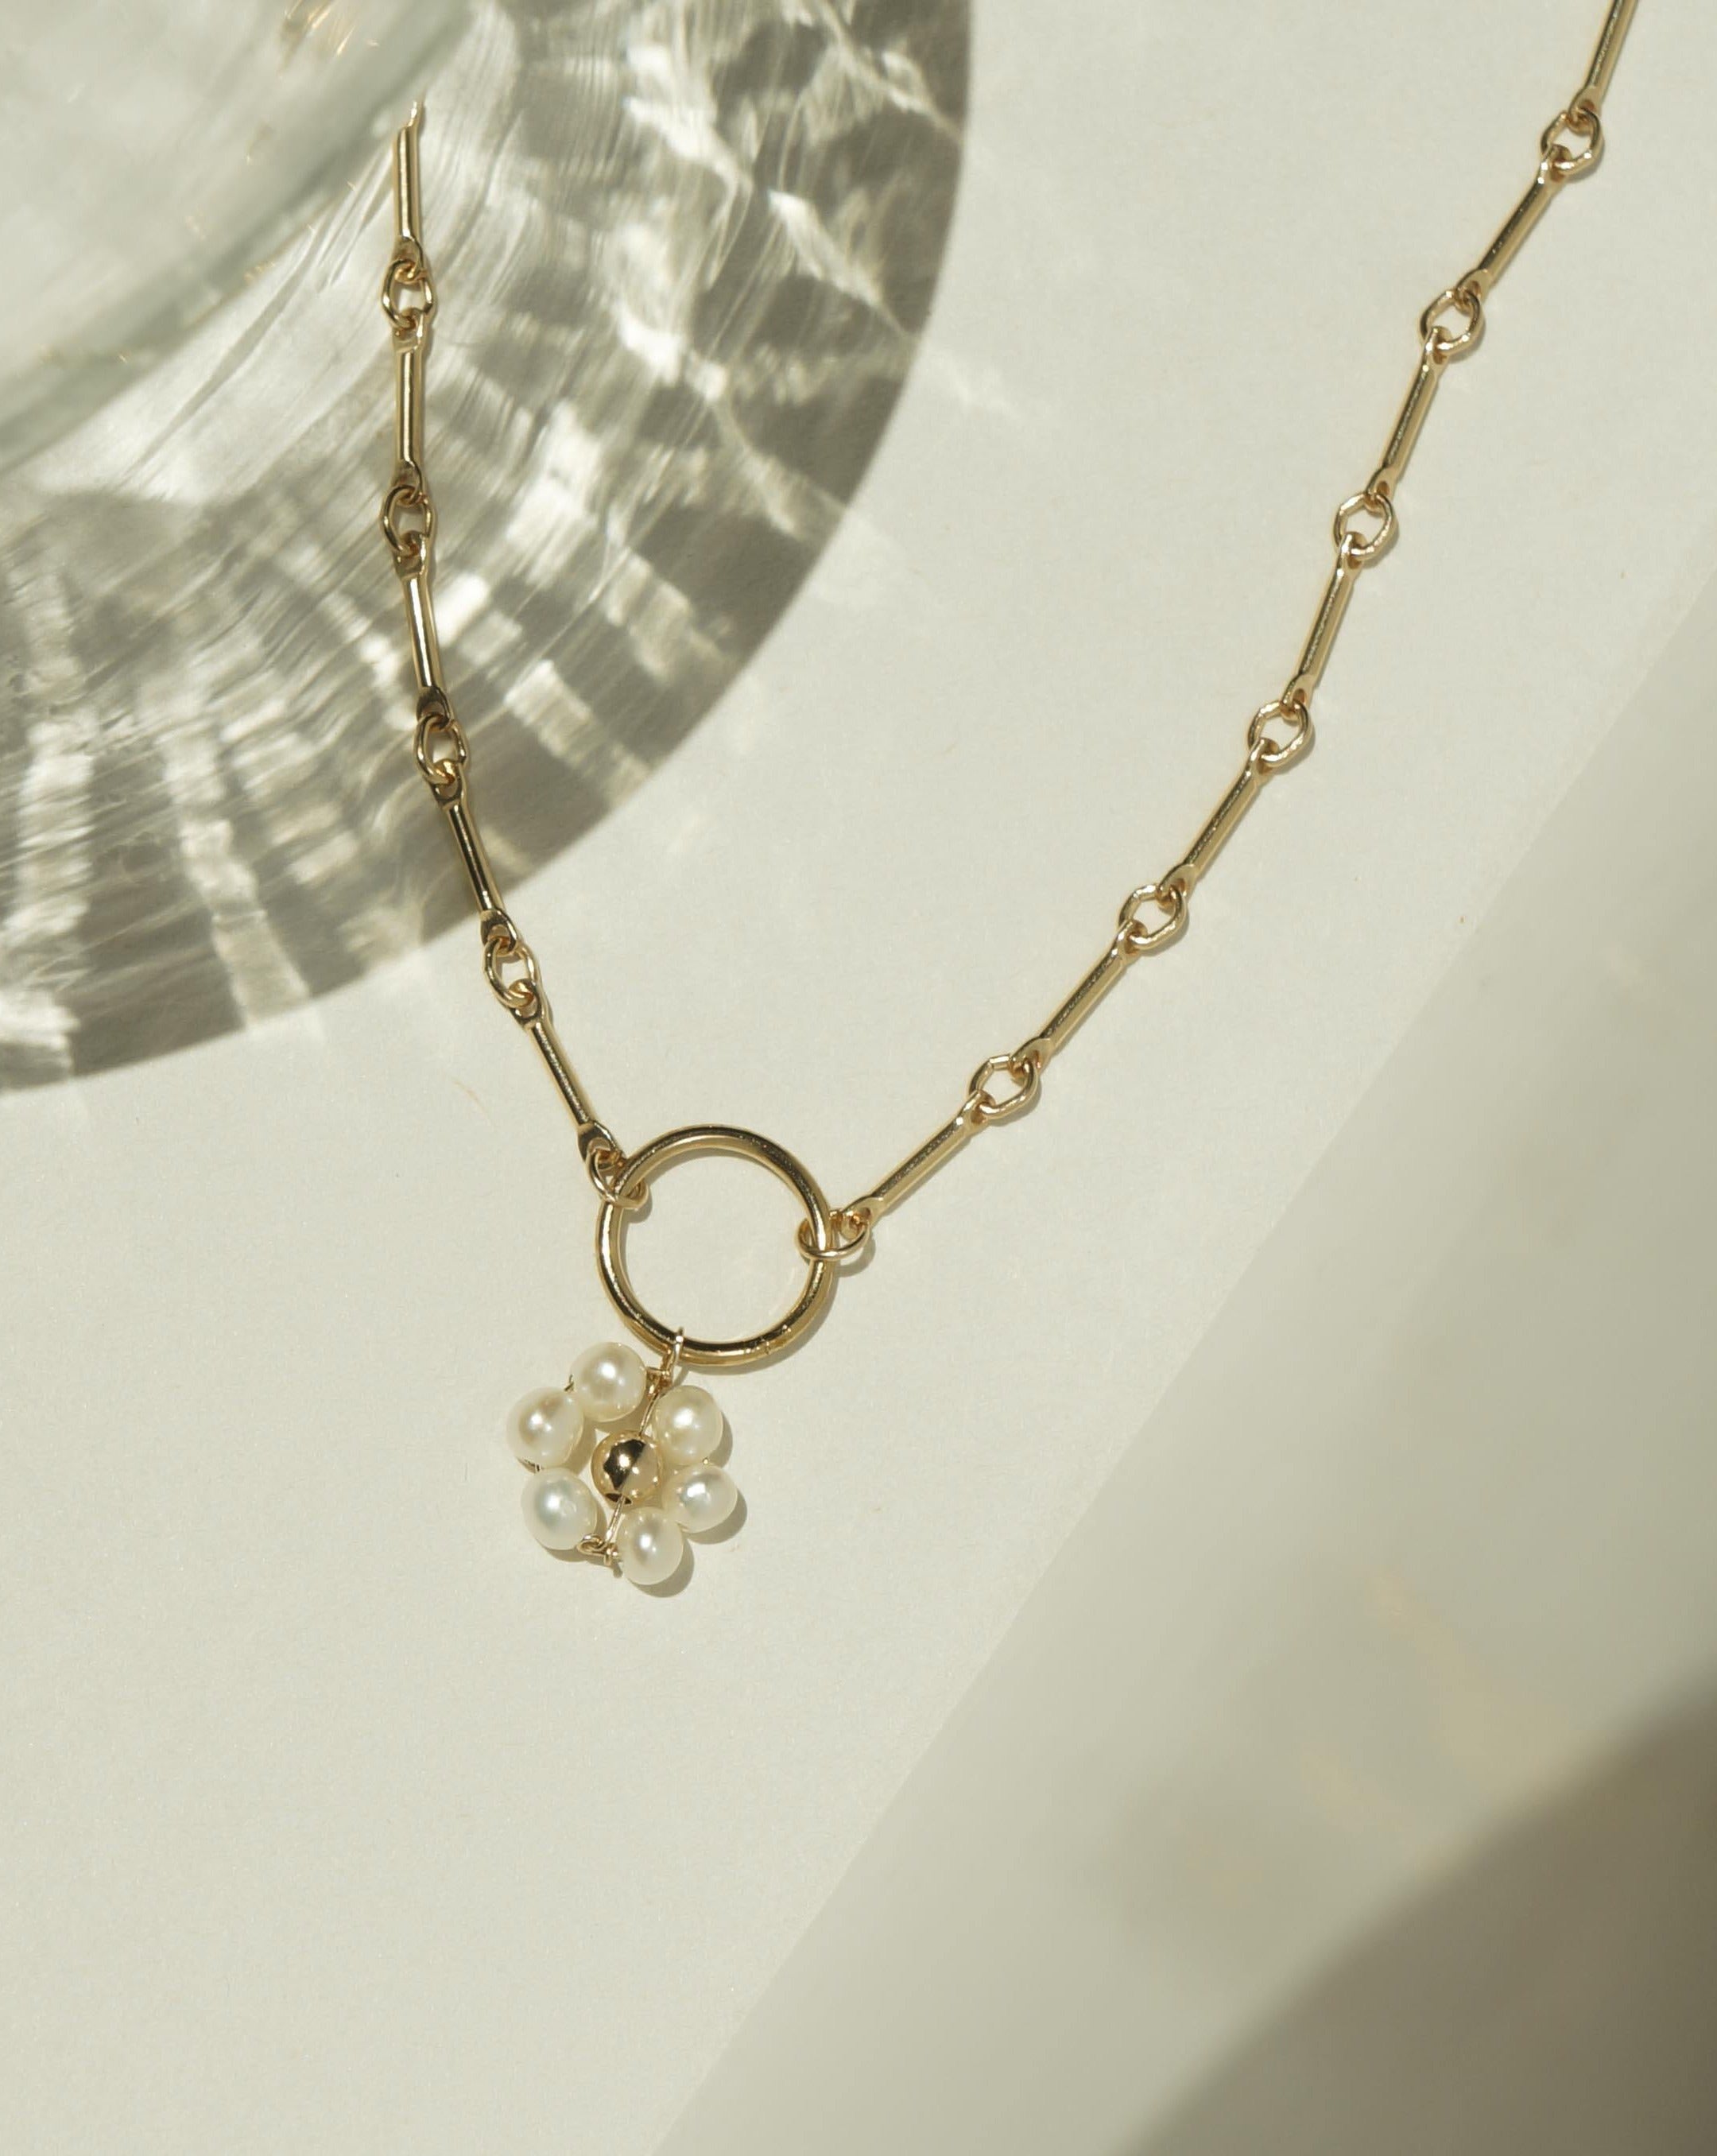 Flor Del Sol Necklace by KOZAKH. A 16 to 18 inch adjustable length necklace in 14K Gold Filled, featuring 3mm Freshwater Pearls in form of a daisy.